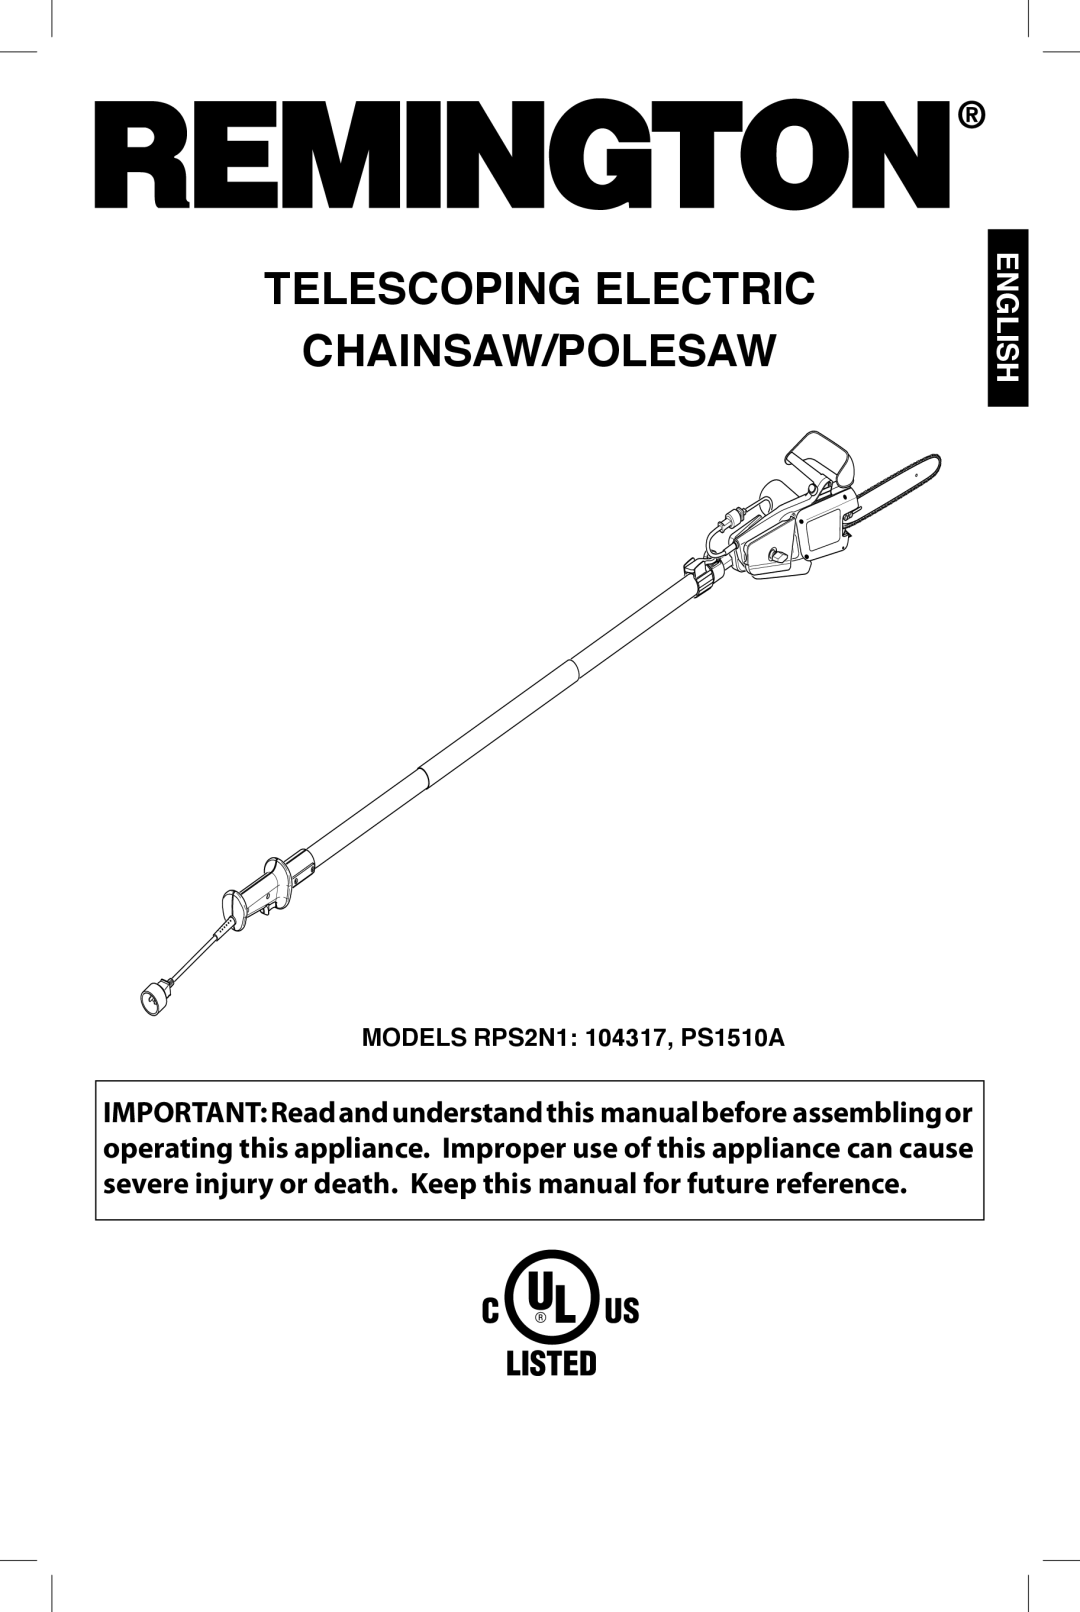 Remington Power Tools manual telescoping electric chainsaw/polesaw, English, MODELS RPS2N1 104317, PS1510A 